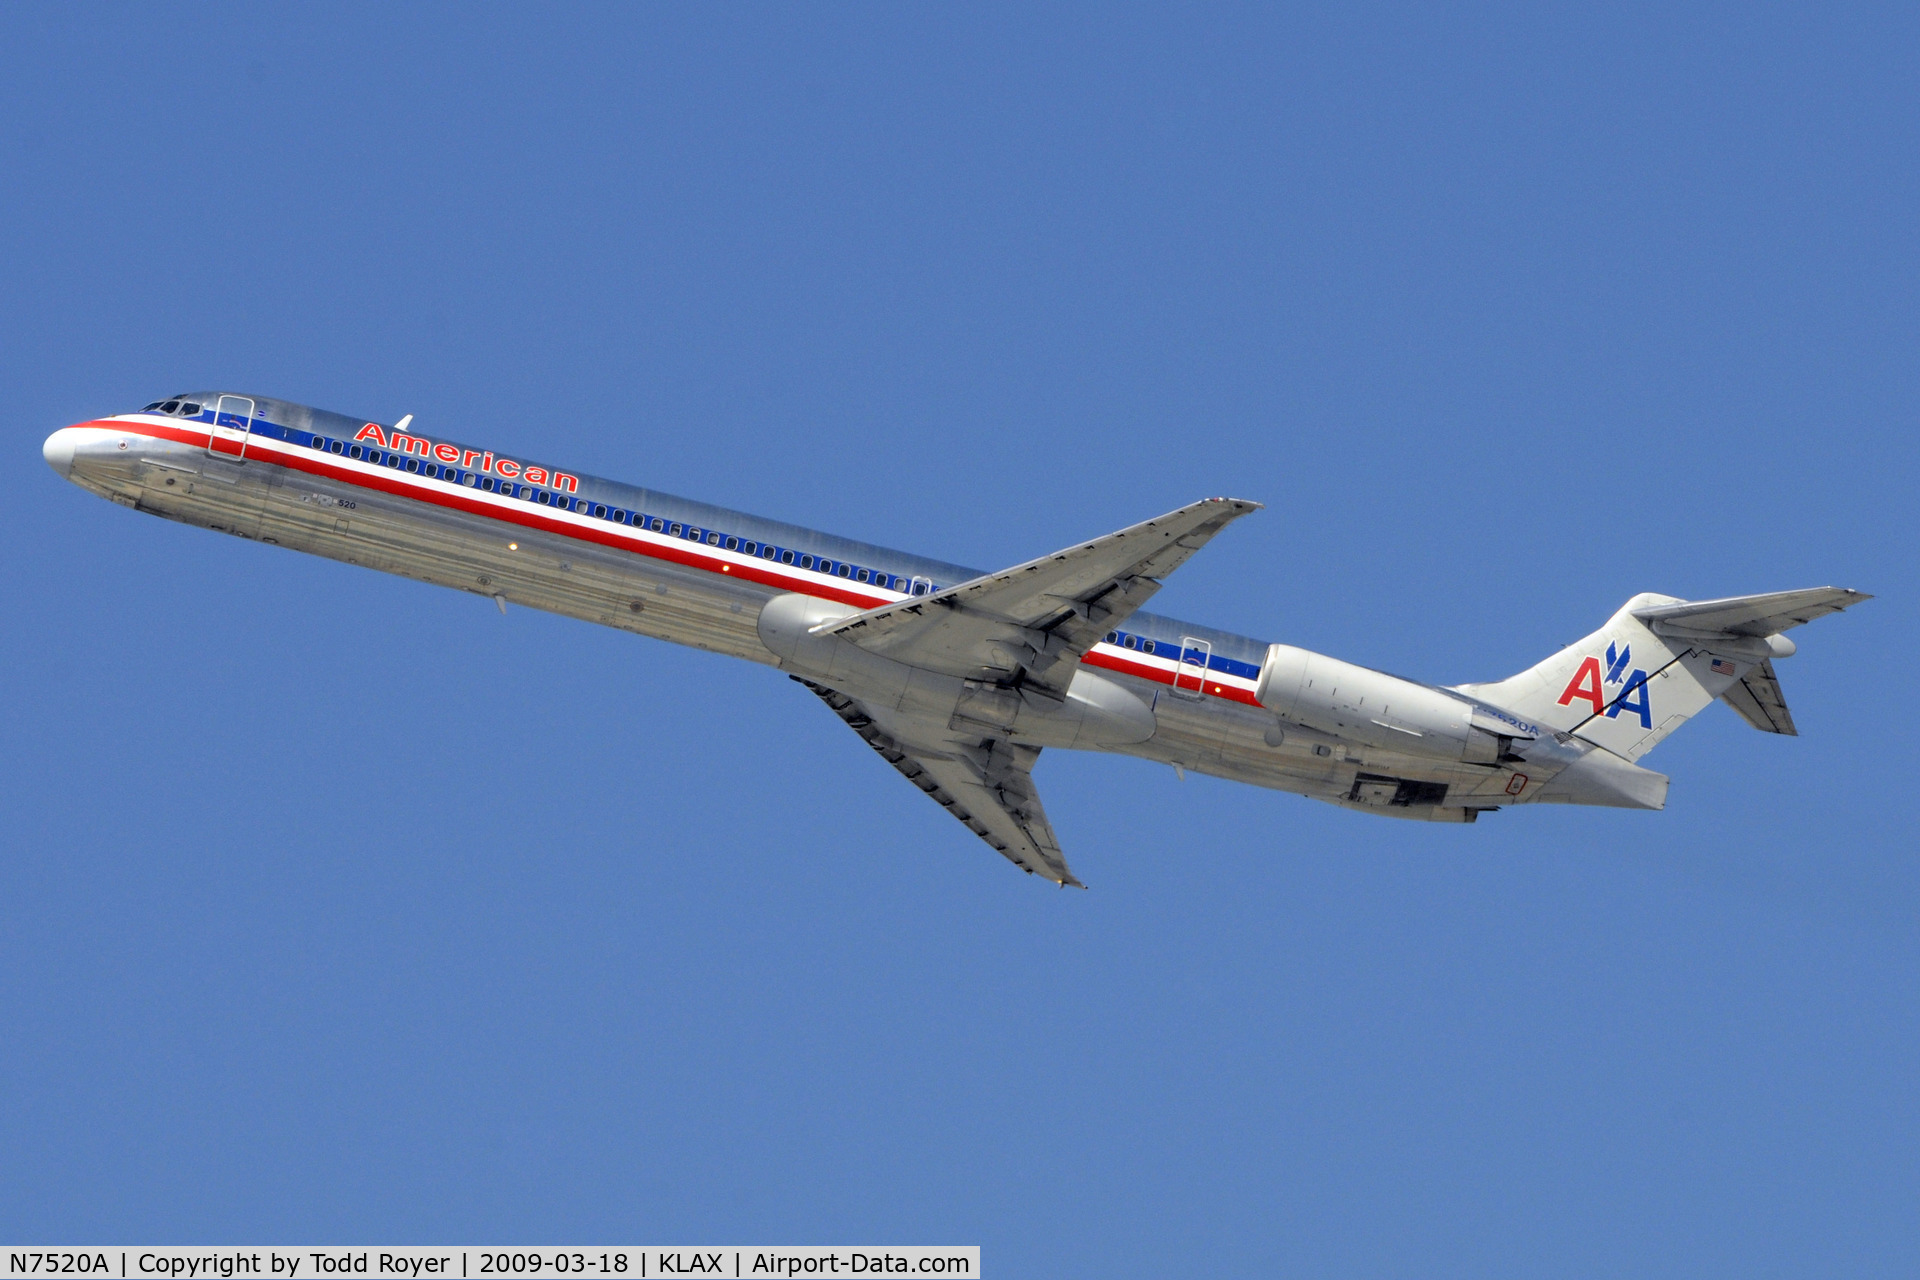 N7520A, 1990 McDonnell Douglas MD-82 (DC-9-82) C/N 49897, Departing LAX on 25R